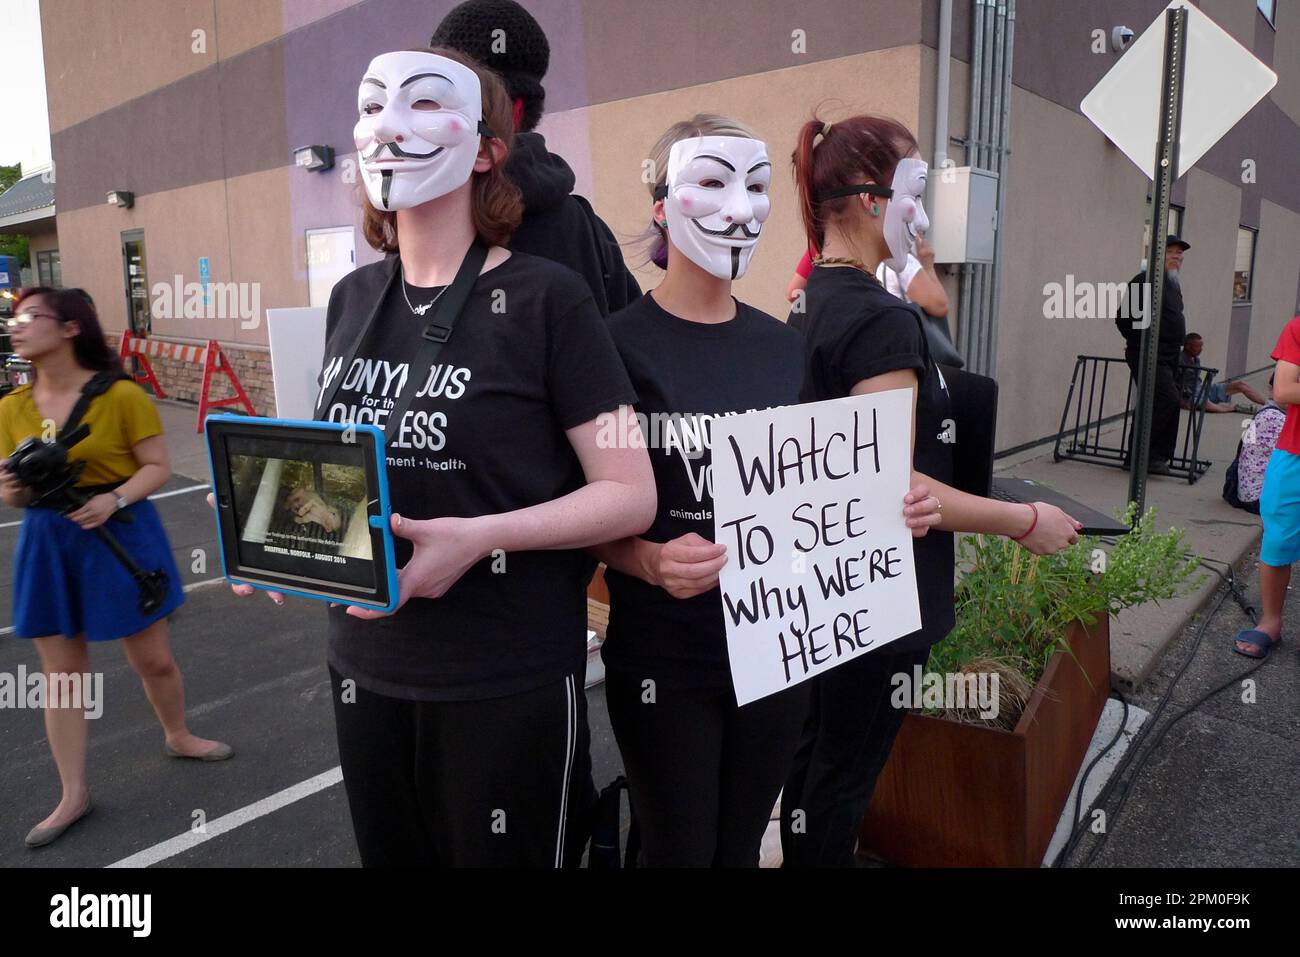 Anonymous for Voiceless vegan animal activists with The Cube of Truth holding signs, electronic devices, and wearing Guy Fawkes masks in St. Paul, MN. Stock Photo